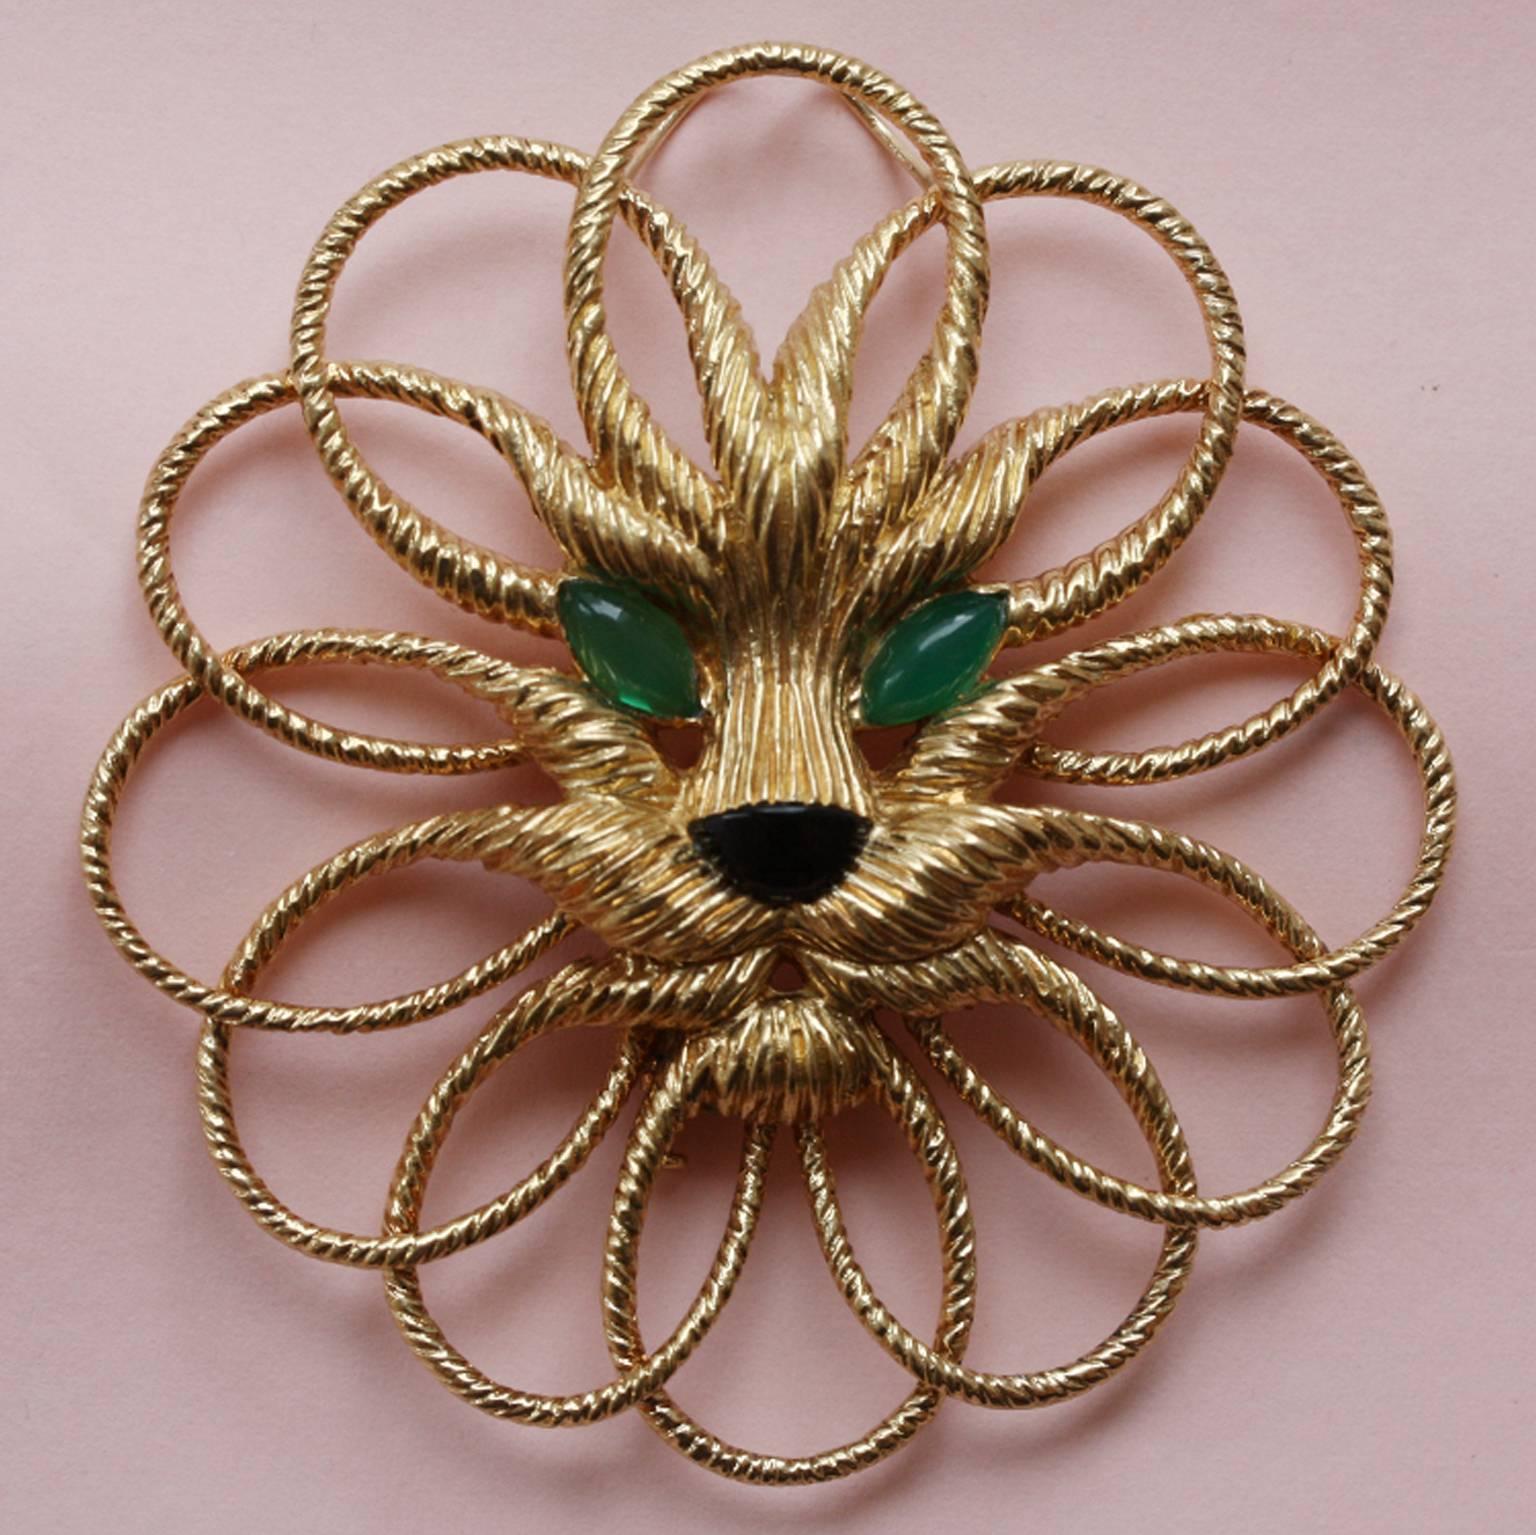 A marvelous 18 carat gold lion brooch (and pendant). Its whiskers and manes are designed in circles of textured gold that go around his face, with an onyx nose and chrysoprase eyes, on a 18 carat gold long chain, both signed and numbered: Van Cleef